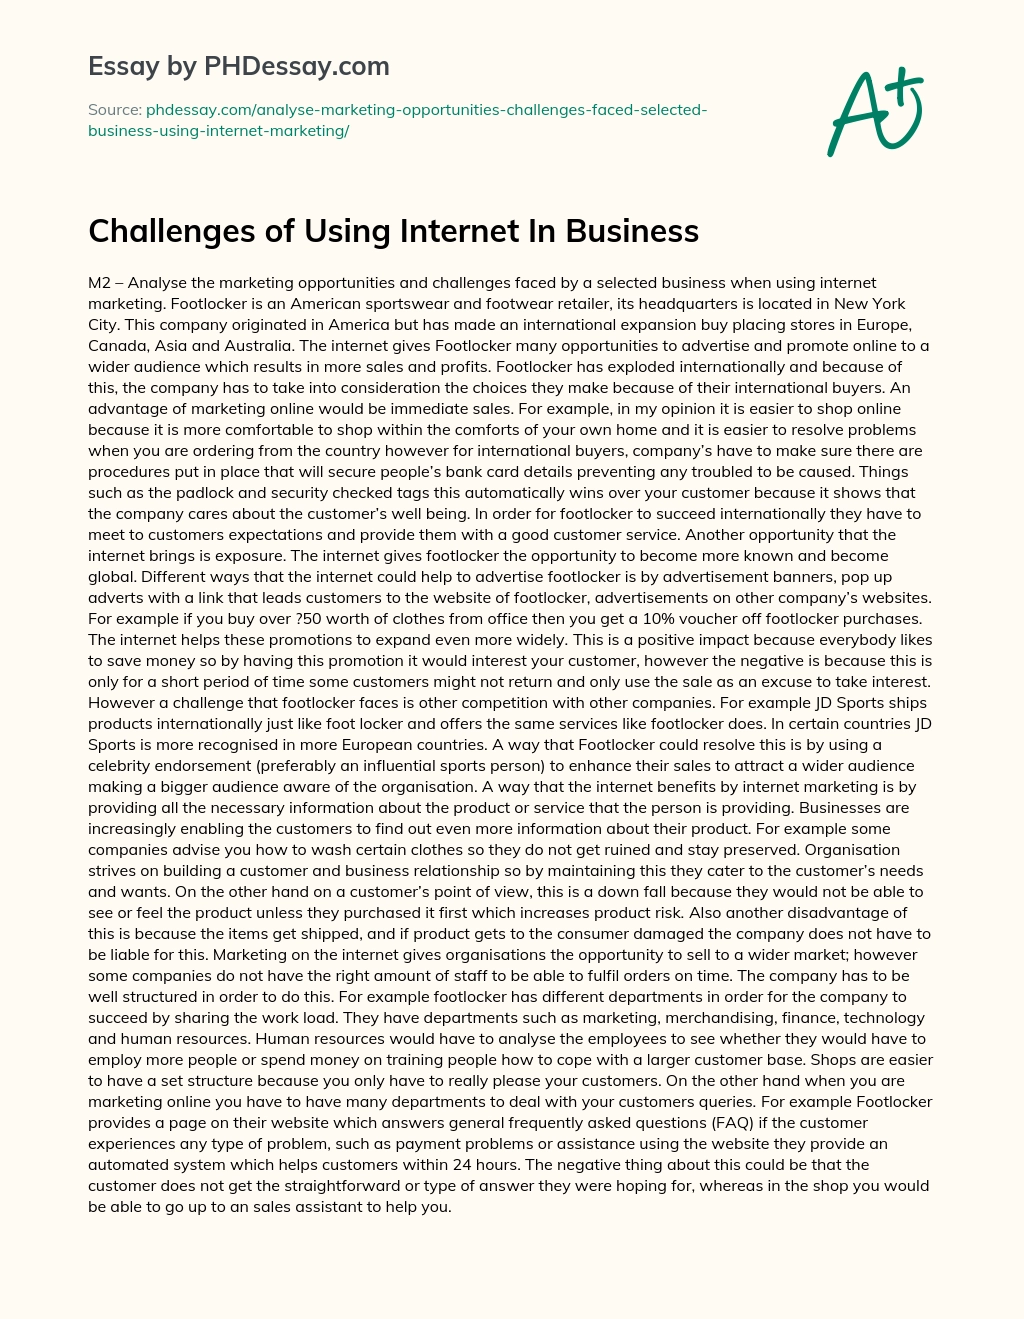 Challenges of Using Internet In Business essay